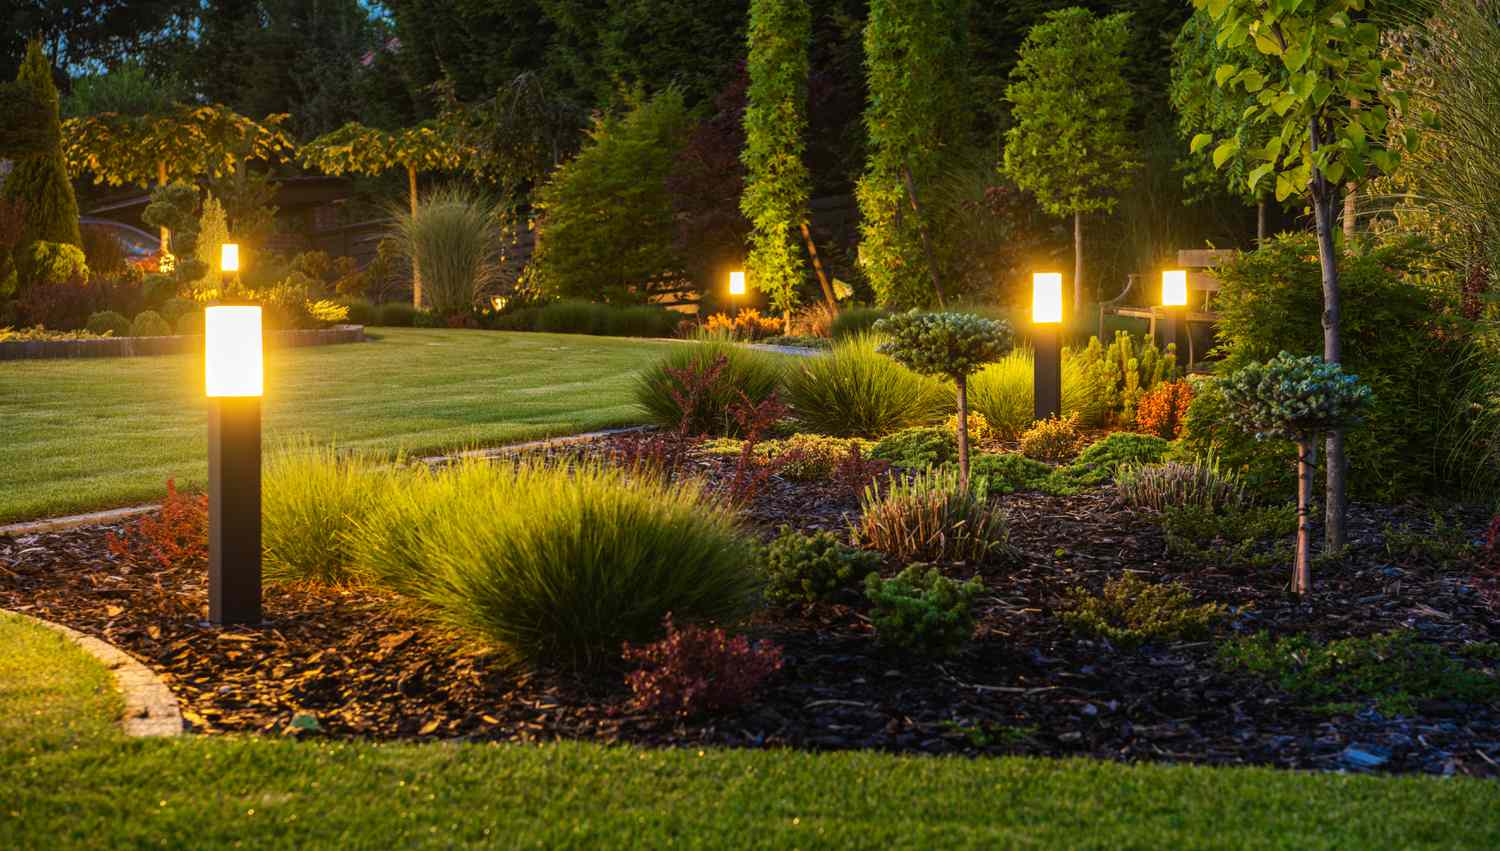 8 Best Smart Outdoor Lighting For Backyards Pathways And More 1706823533 